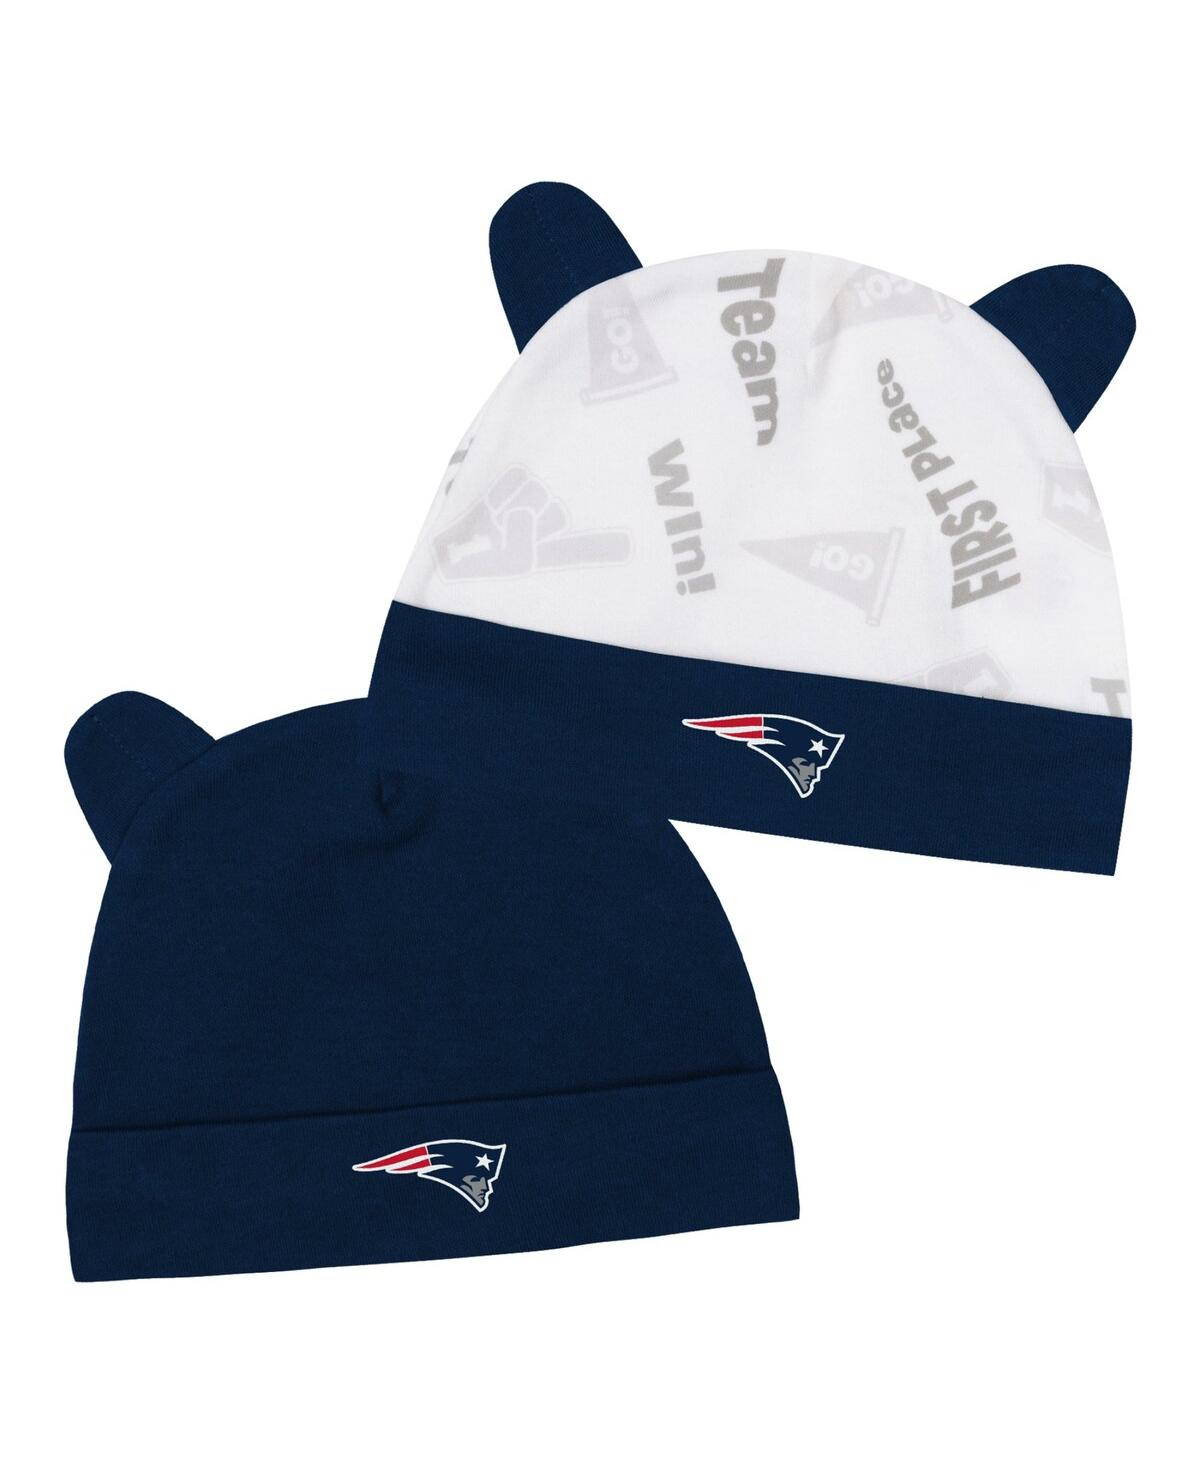 Outerstuff Infant Boys And Girls Navy, White New England Patriots Baby Bear Cuffed Knit Hat Set In Blue